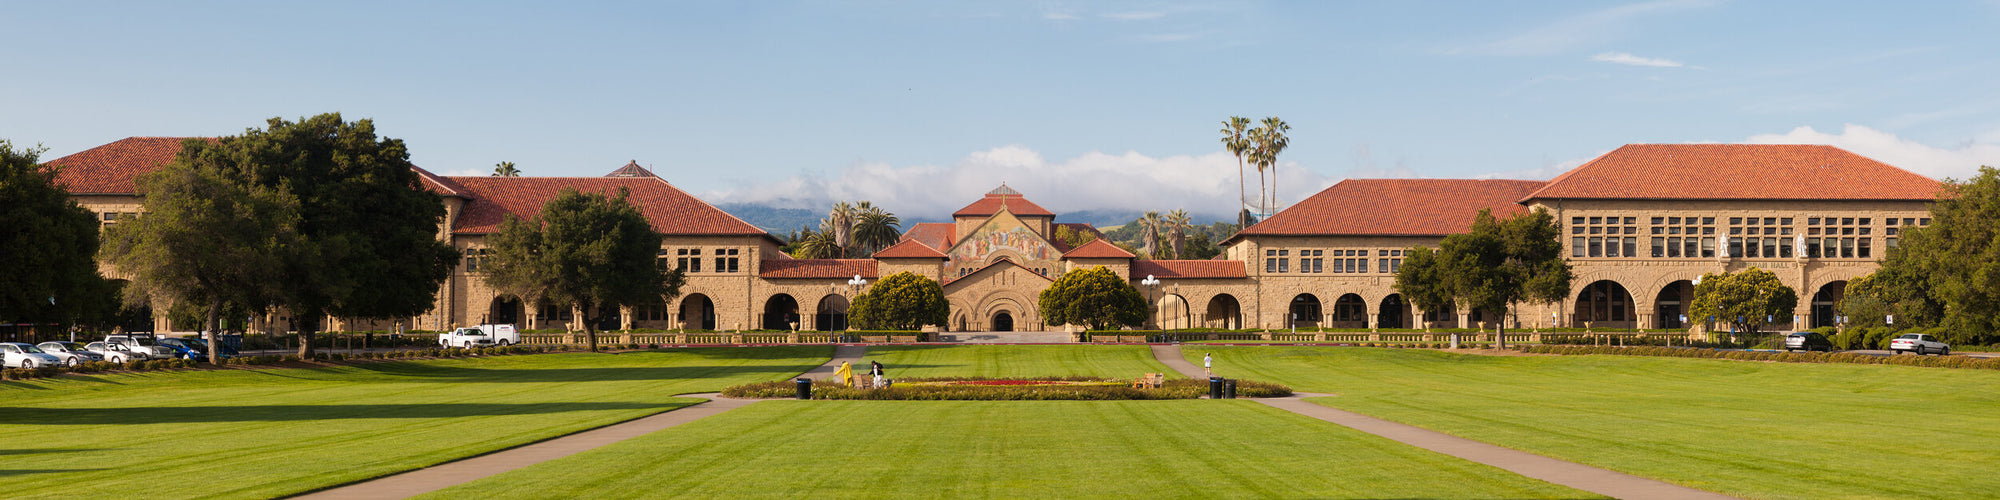 Stanford University. Attribution: King of Hearts / Wikimedia Commons / CC-BY-SA-3.0